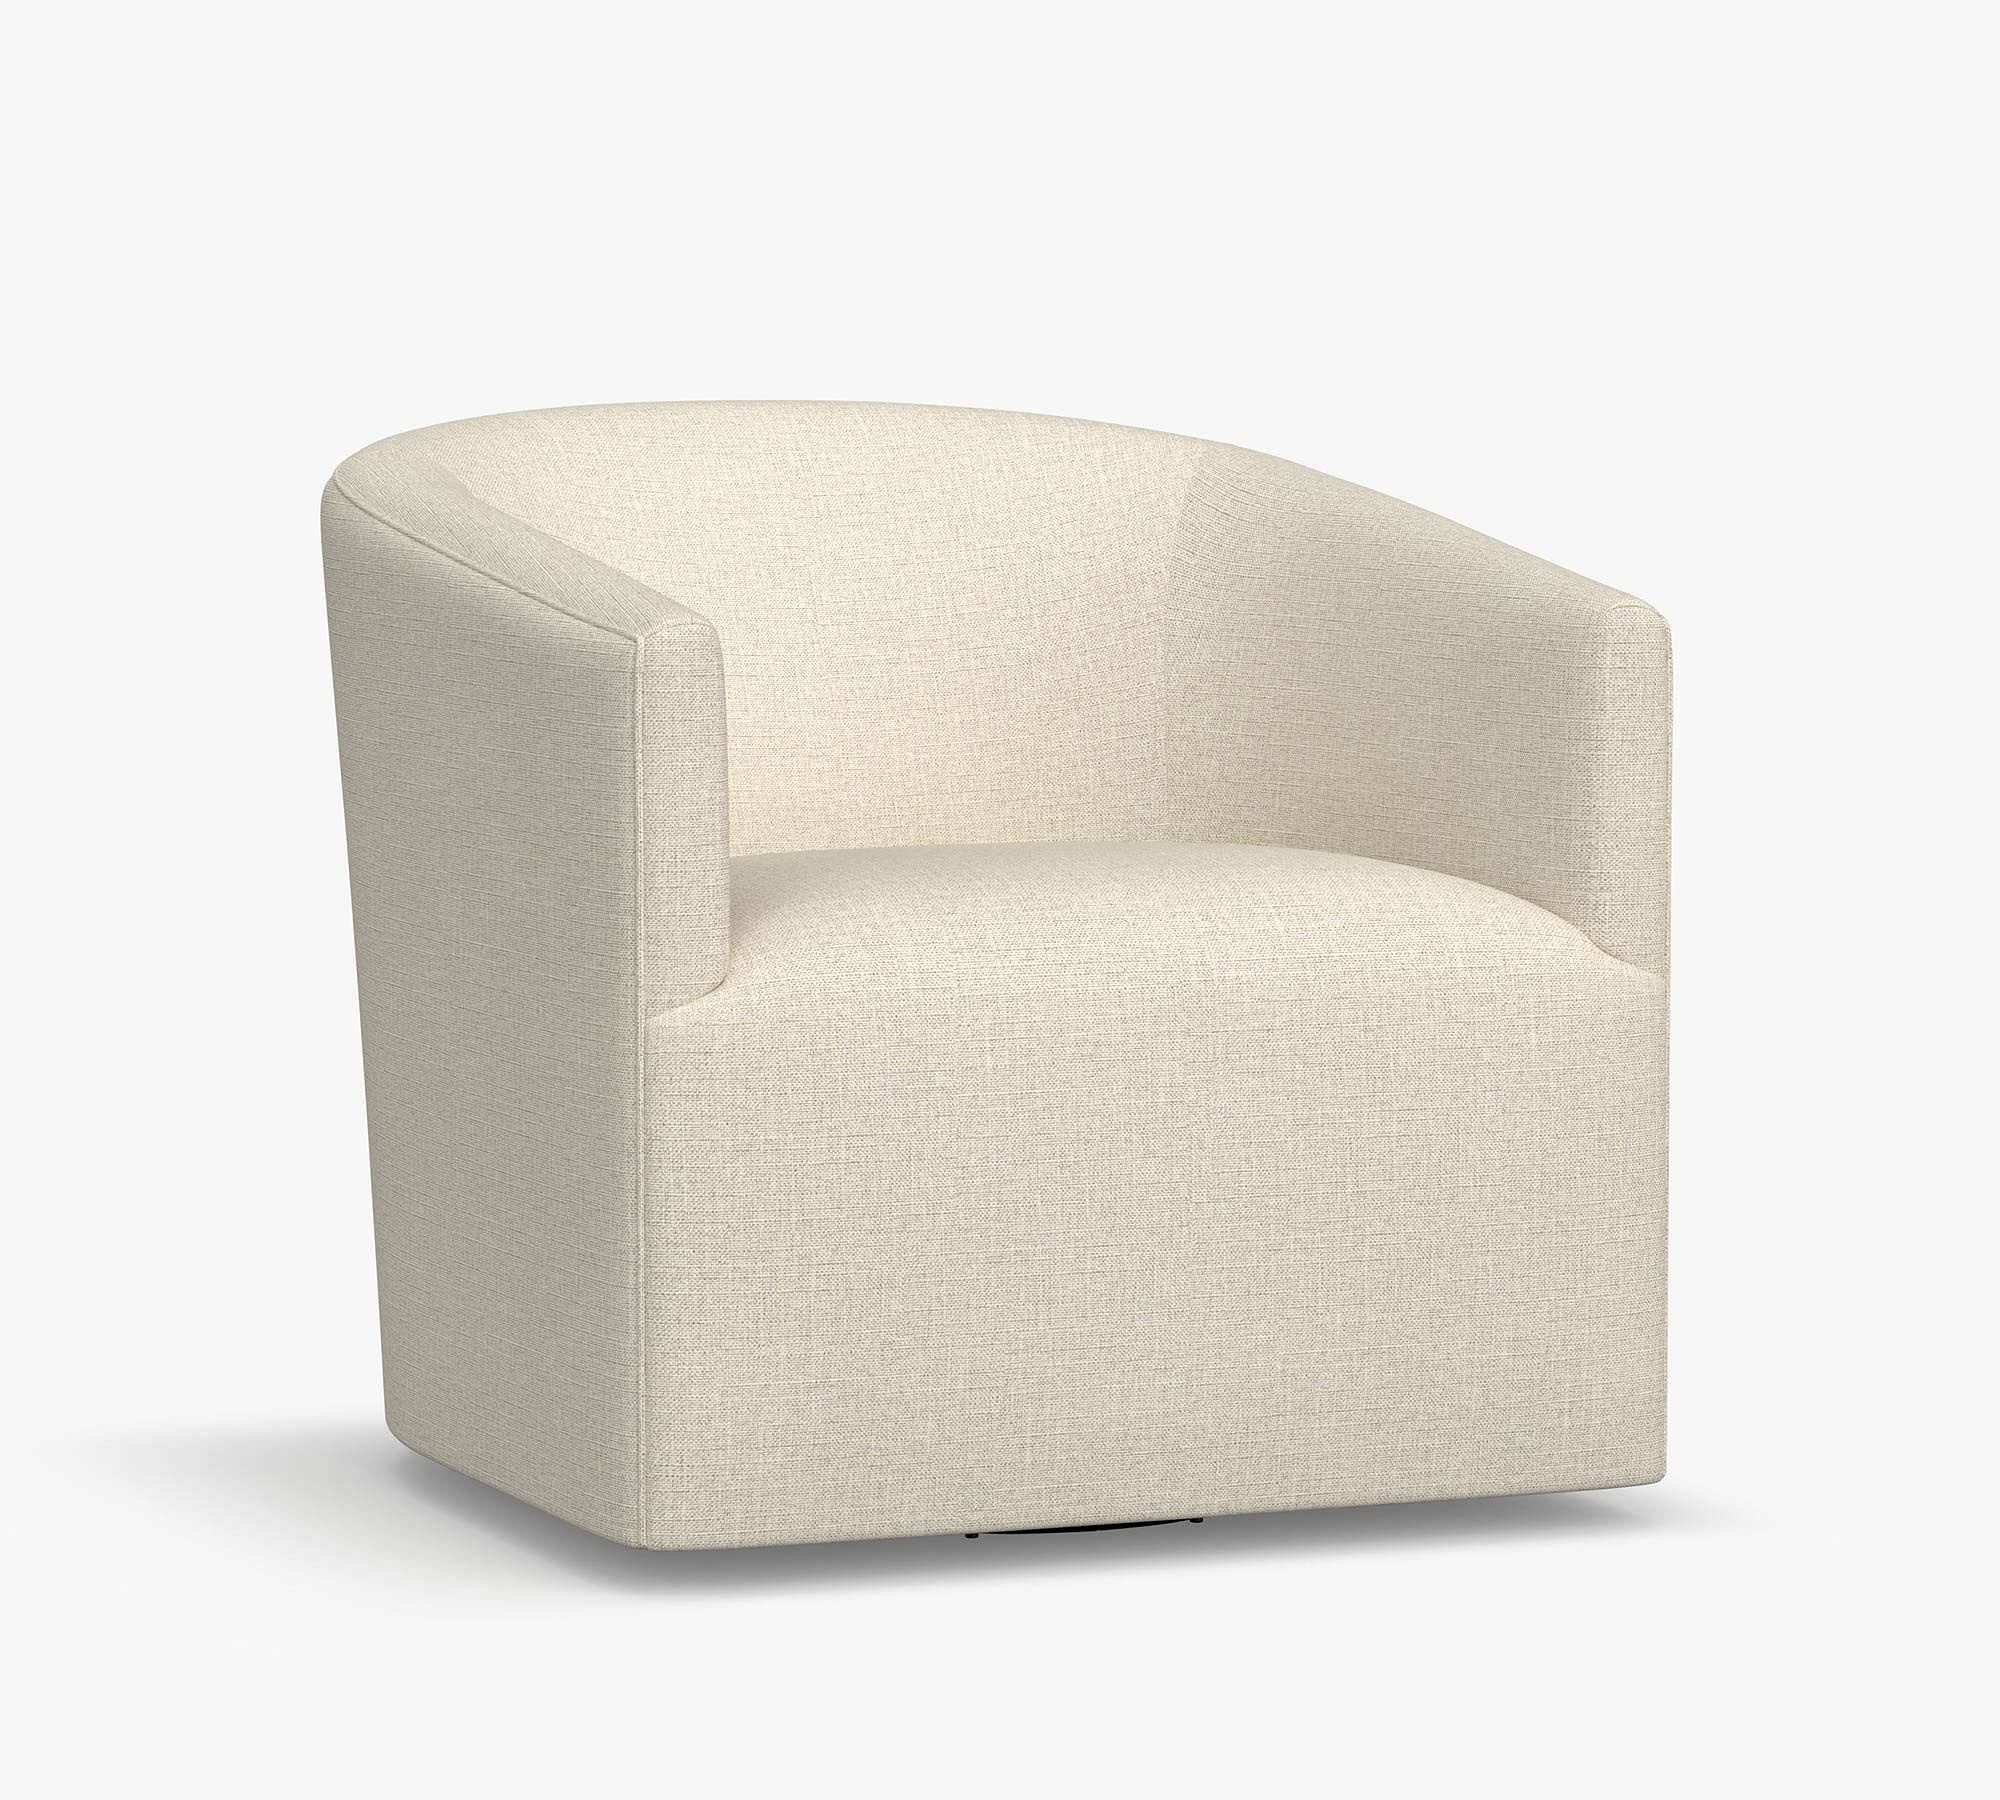 Baldwin Upholstered Swivel Armchair, Polyester Wrapped Cushions, Performance Heathered Basketweave Alabaster White - Image 1